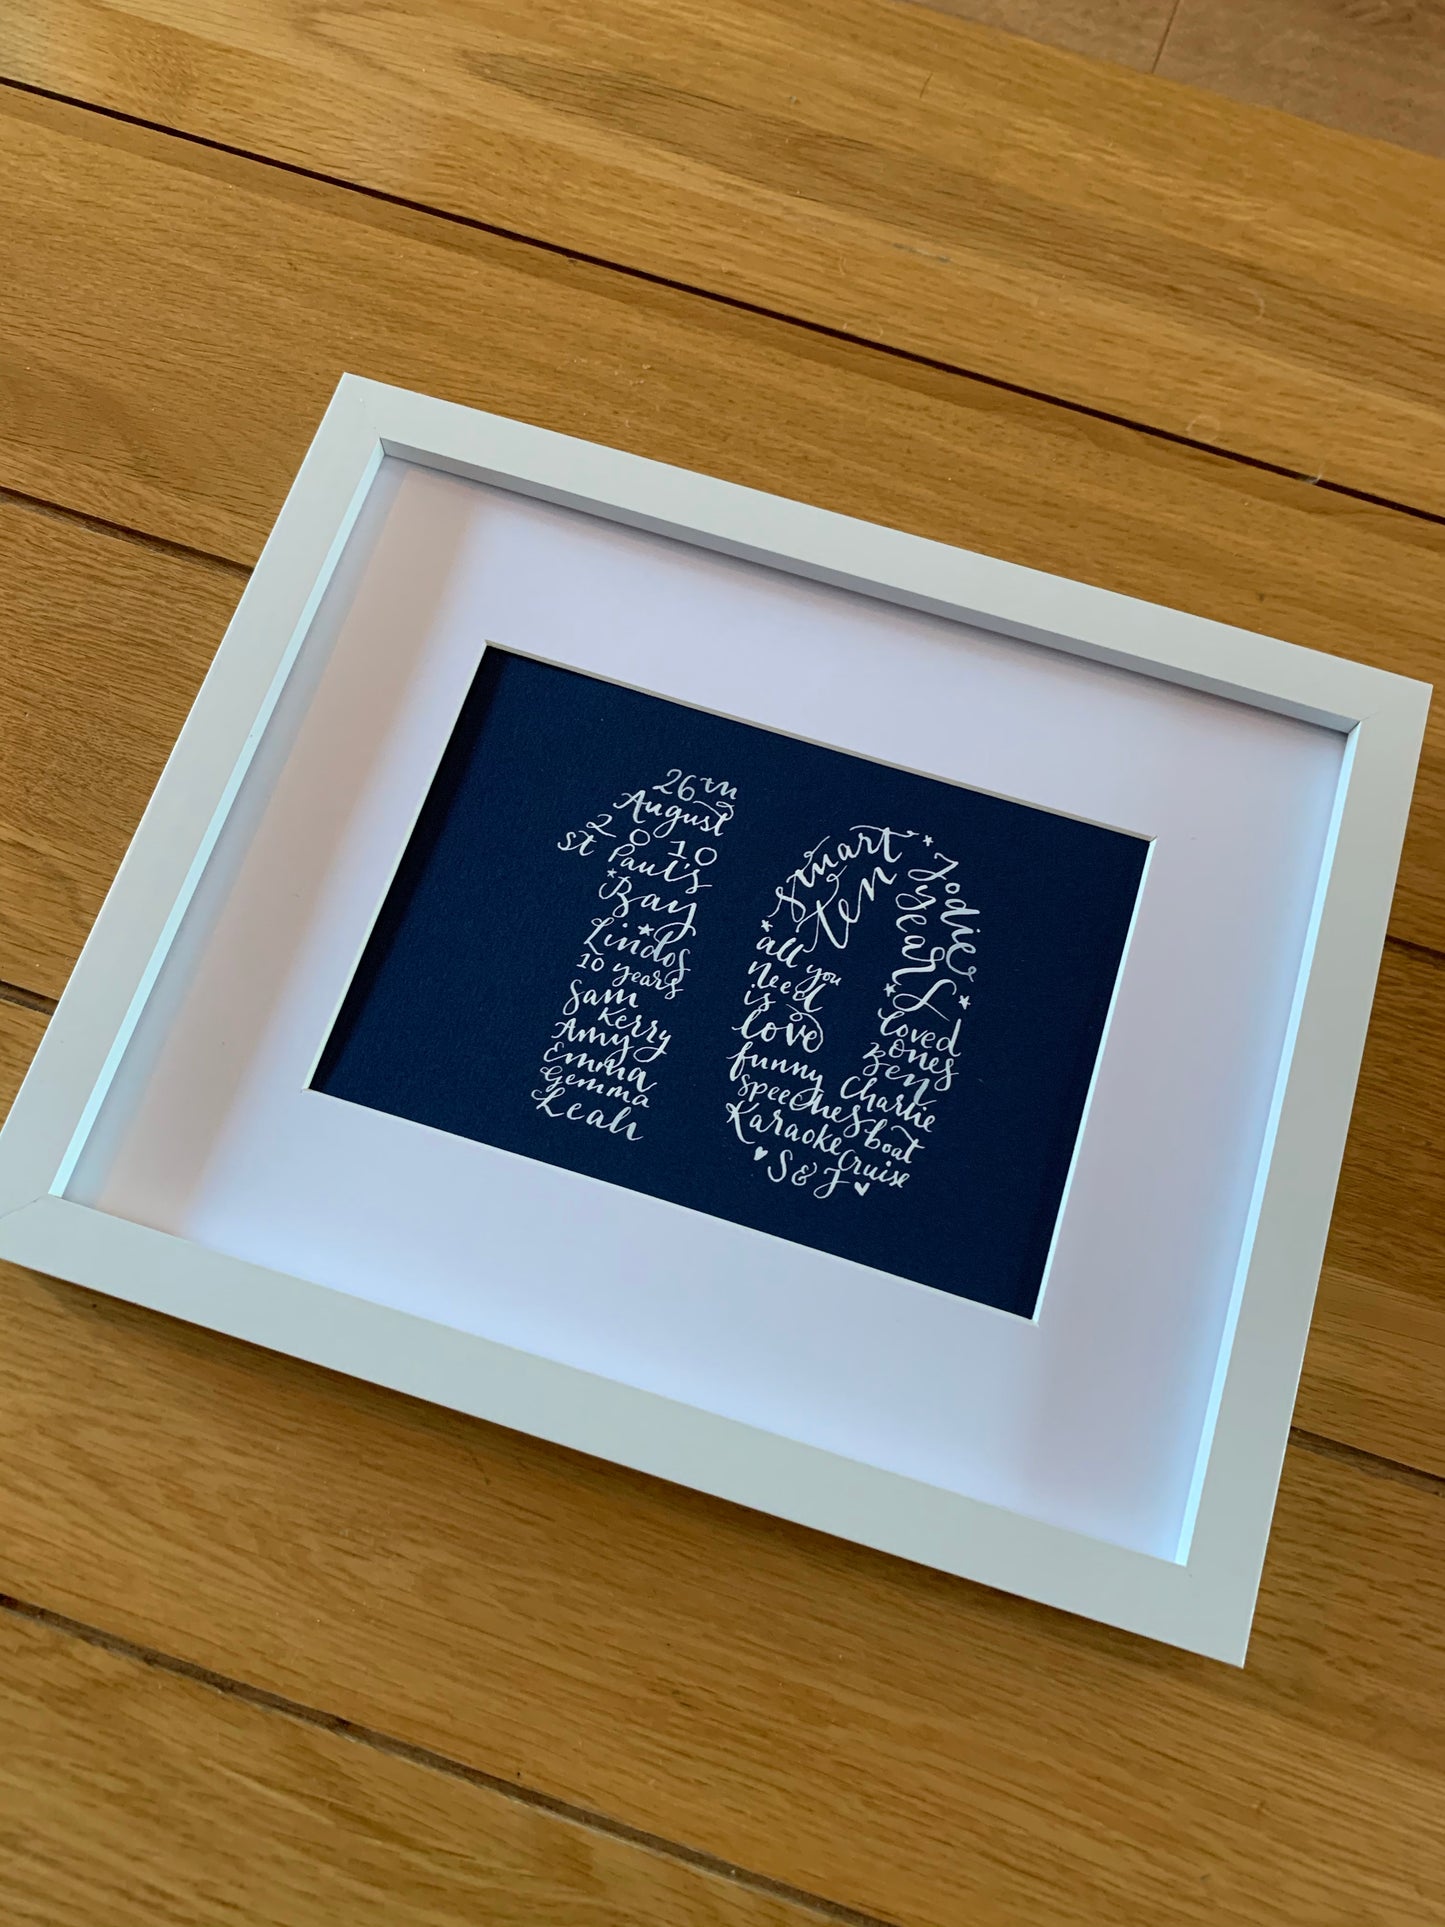 Calligraphy Numbers Framed